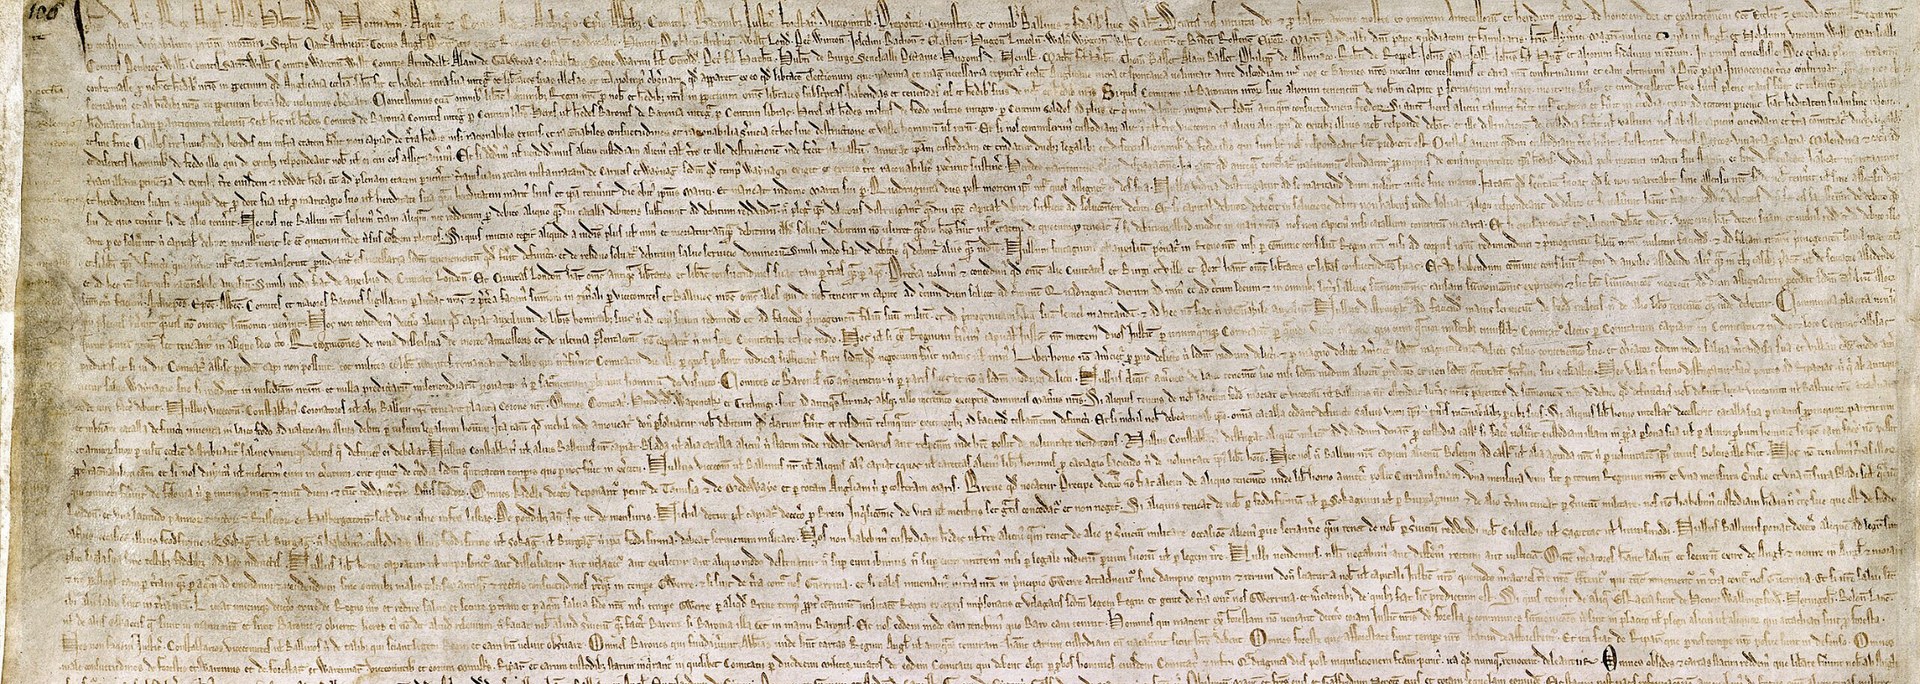 Picture of the Magna Carta